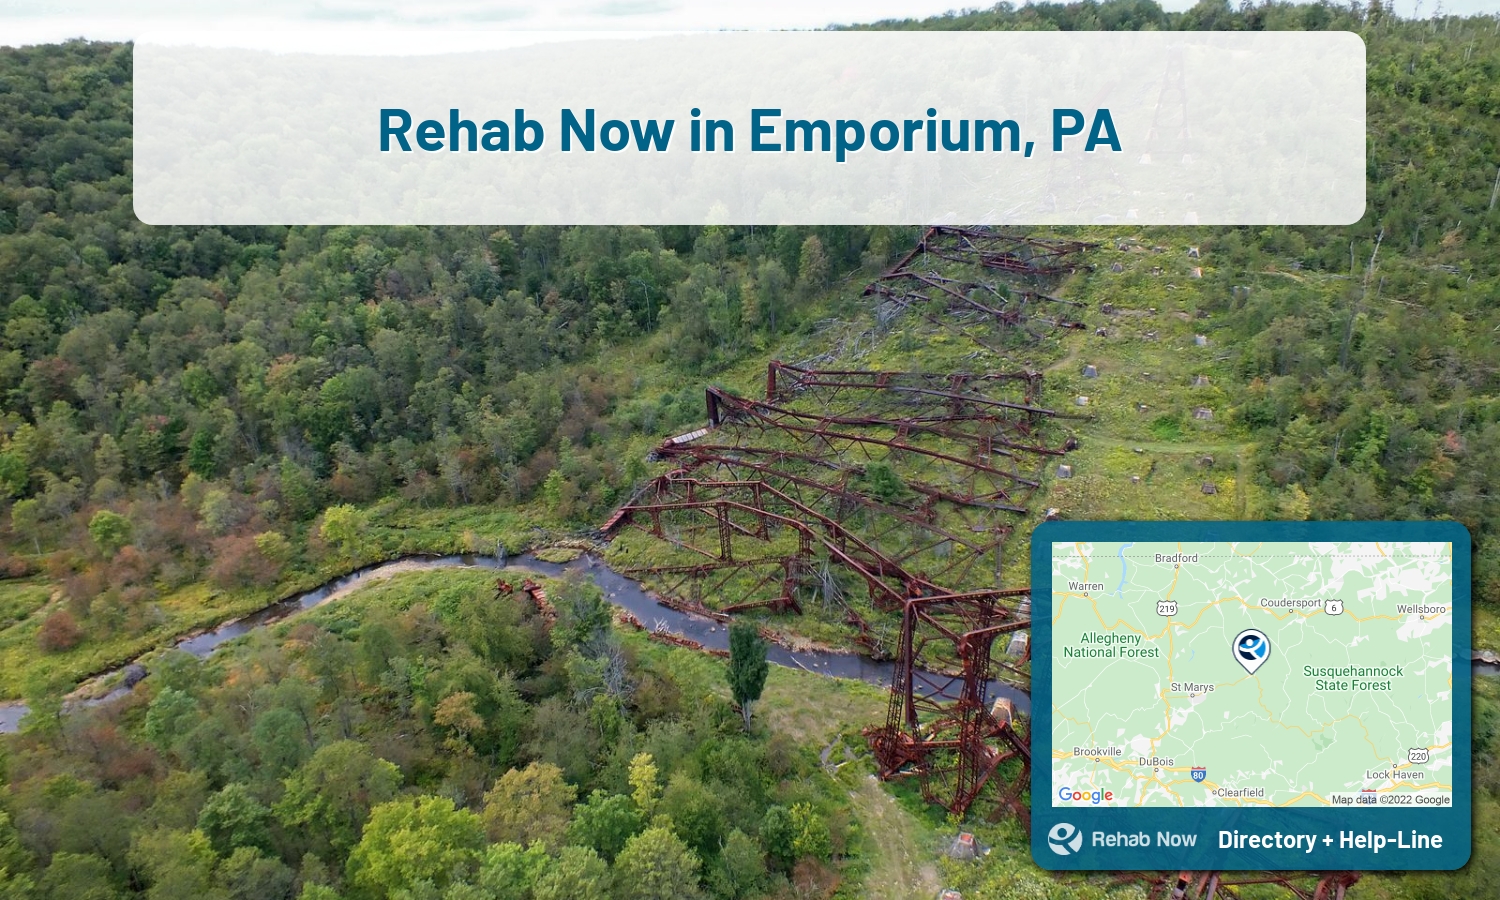 Emporium, PA Treatment Centers. Find drug rehab in Emporium, Pennsylvania, or detox and treatment programs. Get the right help now!